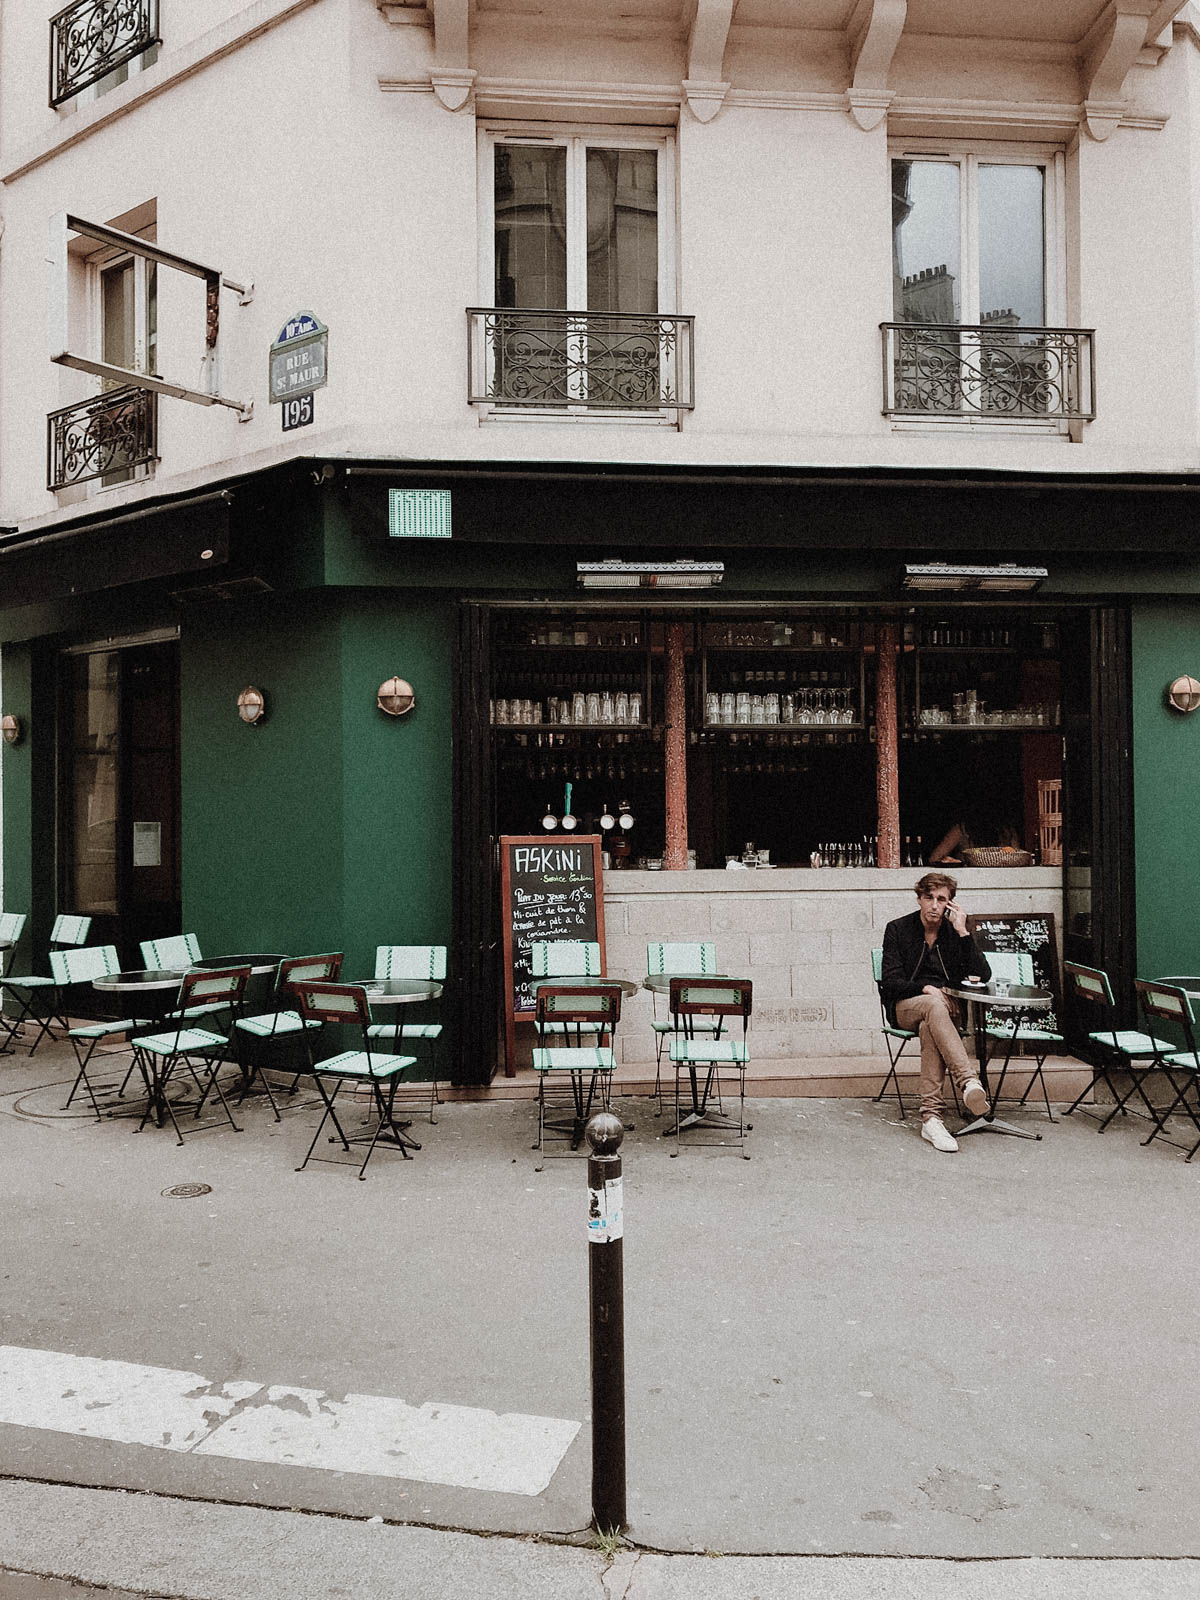 Paris France Travel Guide - Cafe Askini, European Architecture and Buildings / RG Daily Blog